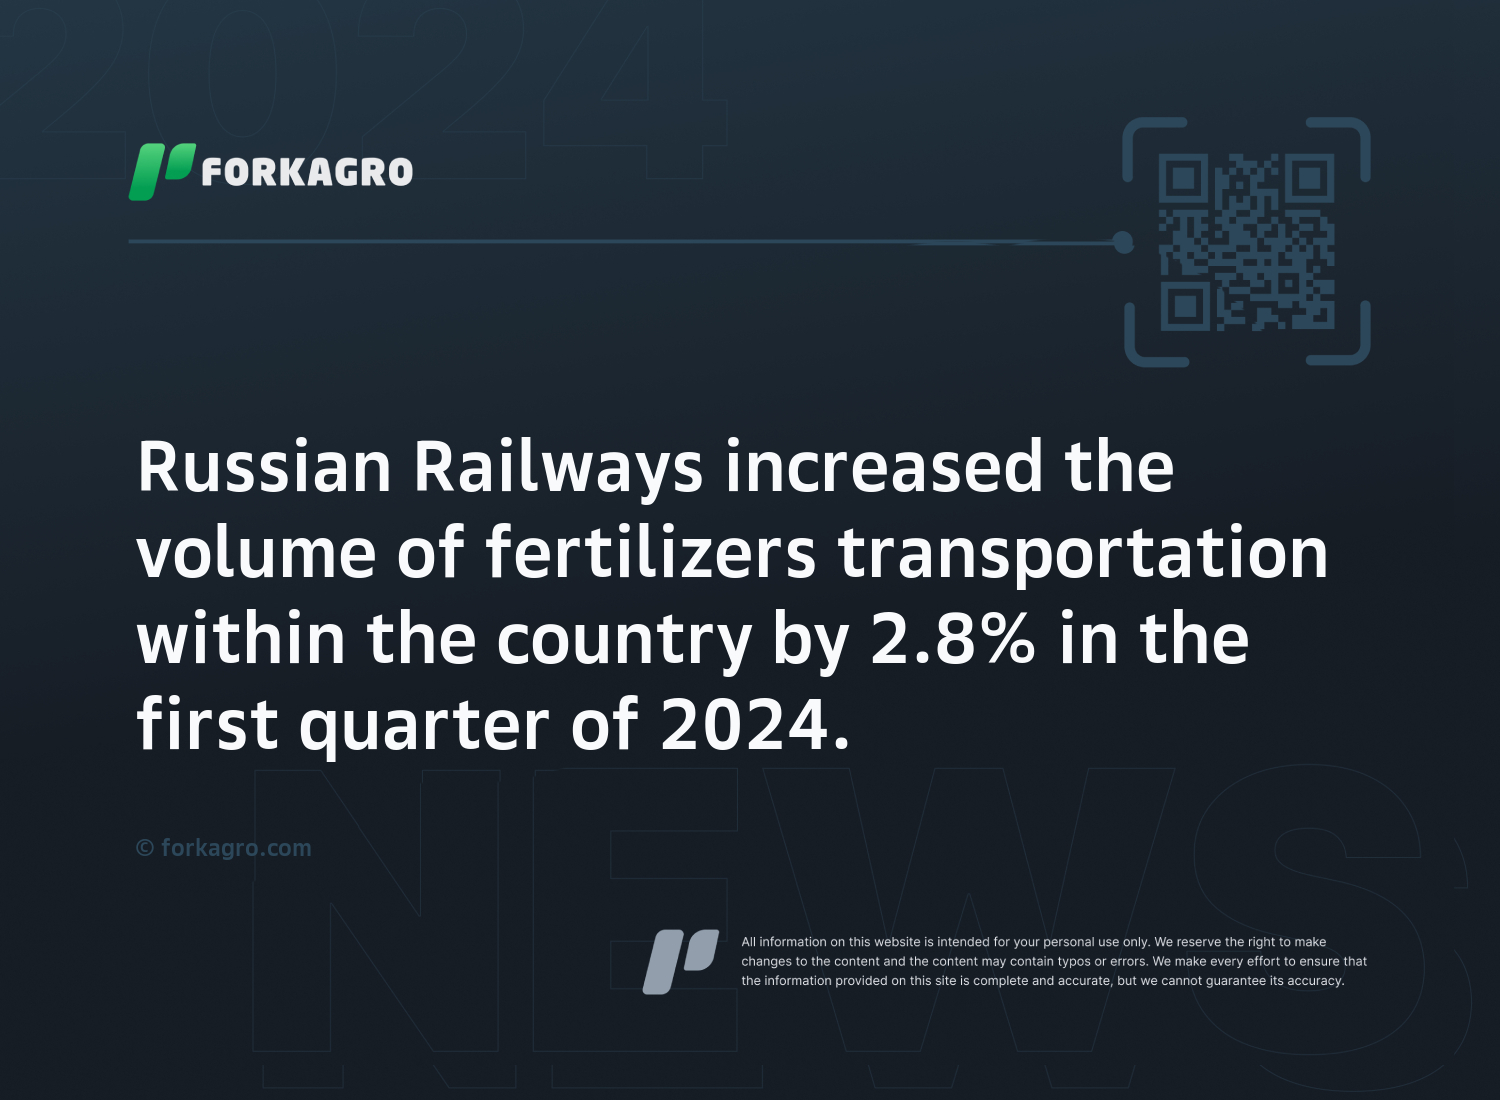 Russian Railways increased the volume of fertilizers transportation within the country by 2.8% in the first quarter of 2024.